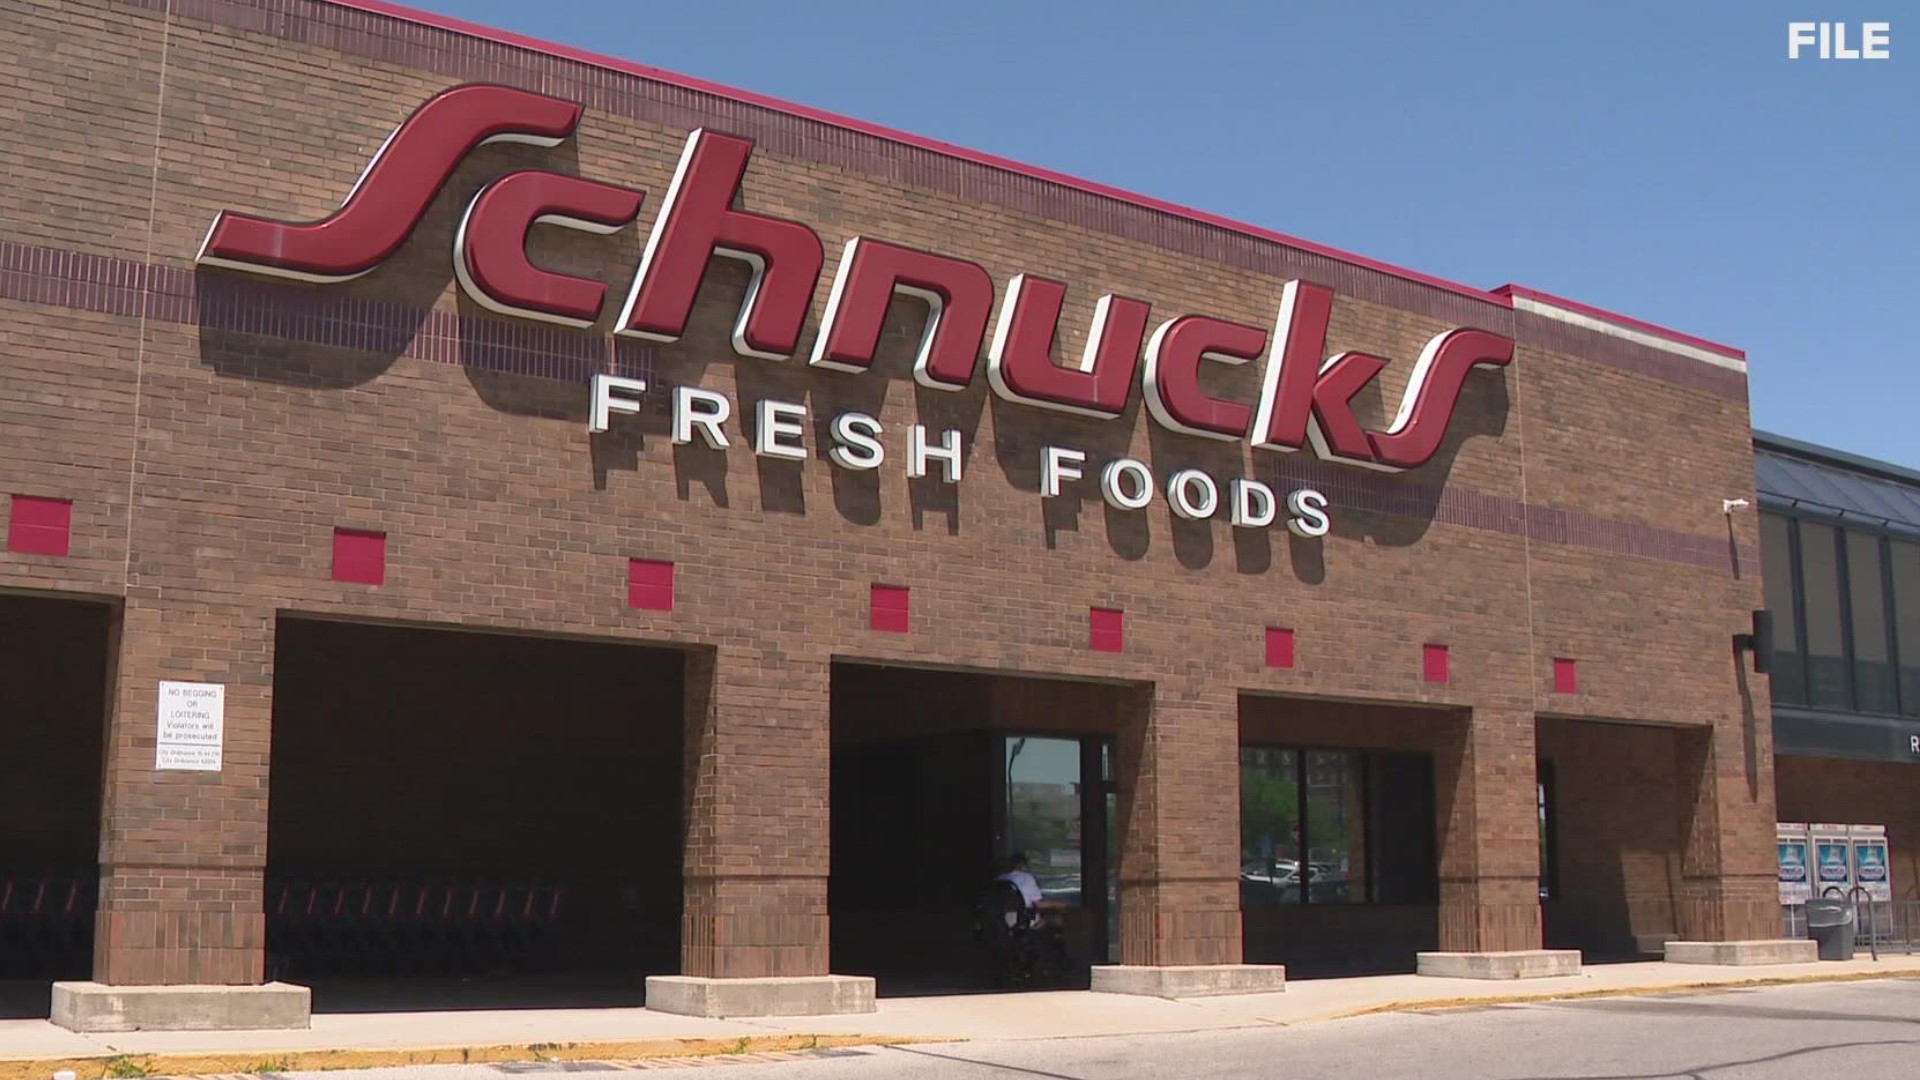 A surge in cases has led Schnucks to change its mask policy again: grocery store employees and vendors are required to wear face coverings.